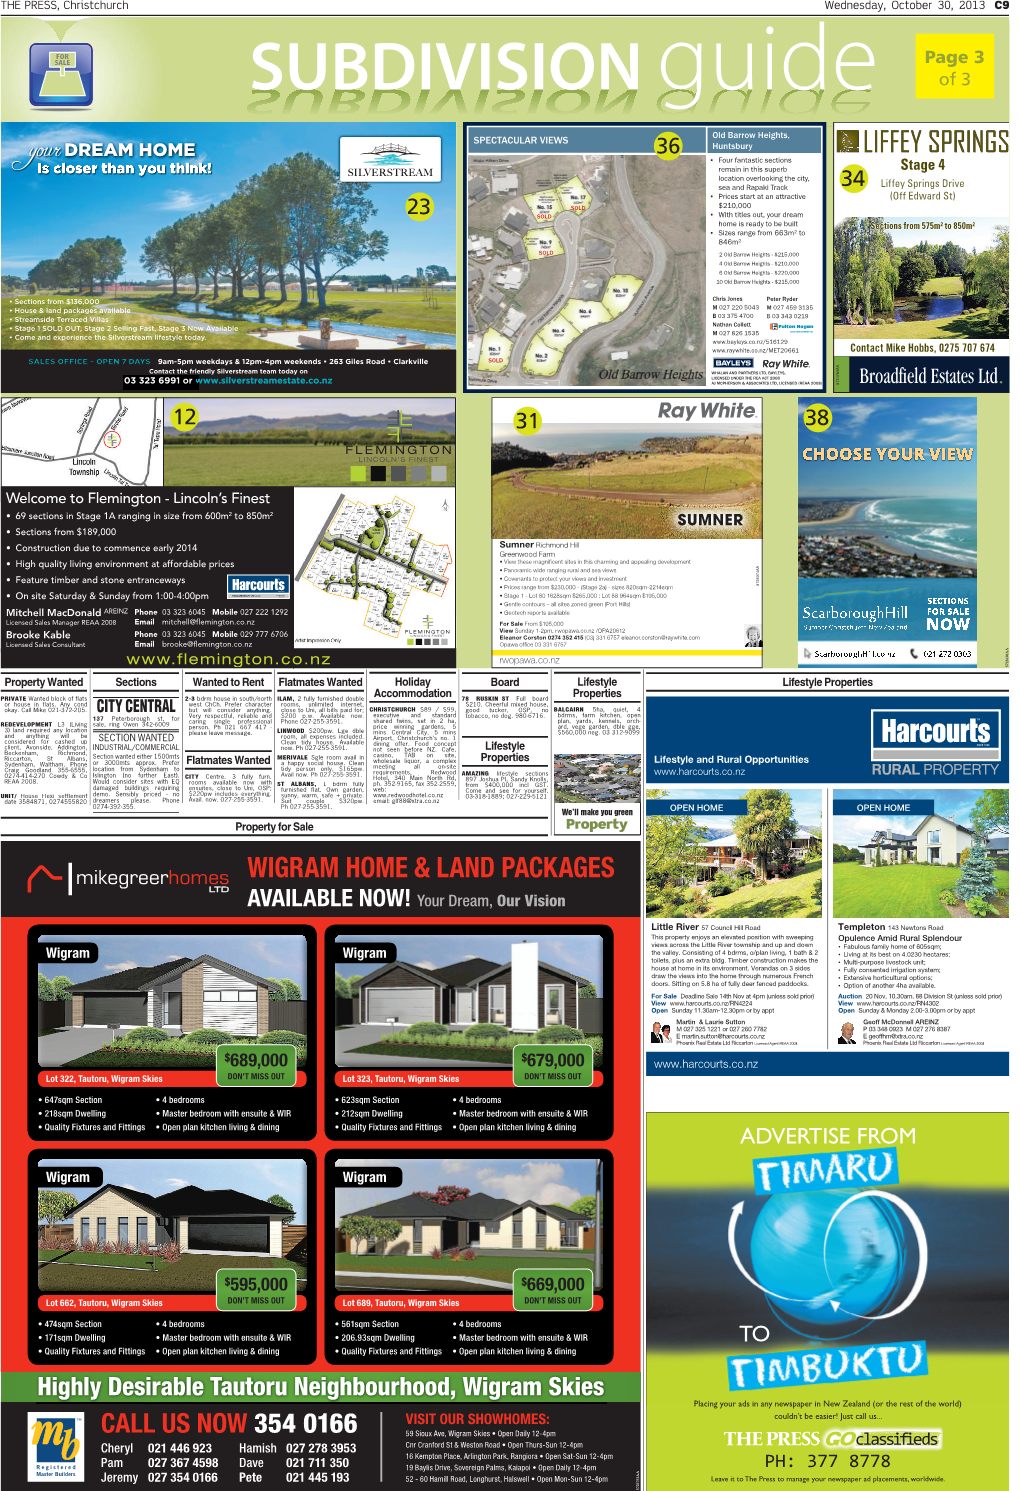 Wigram Home & Land Packages